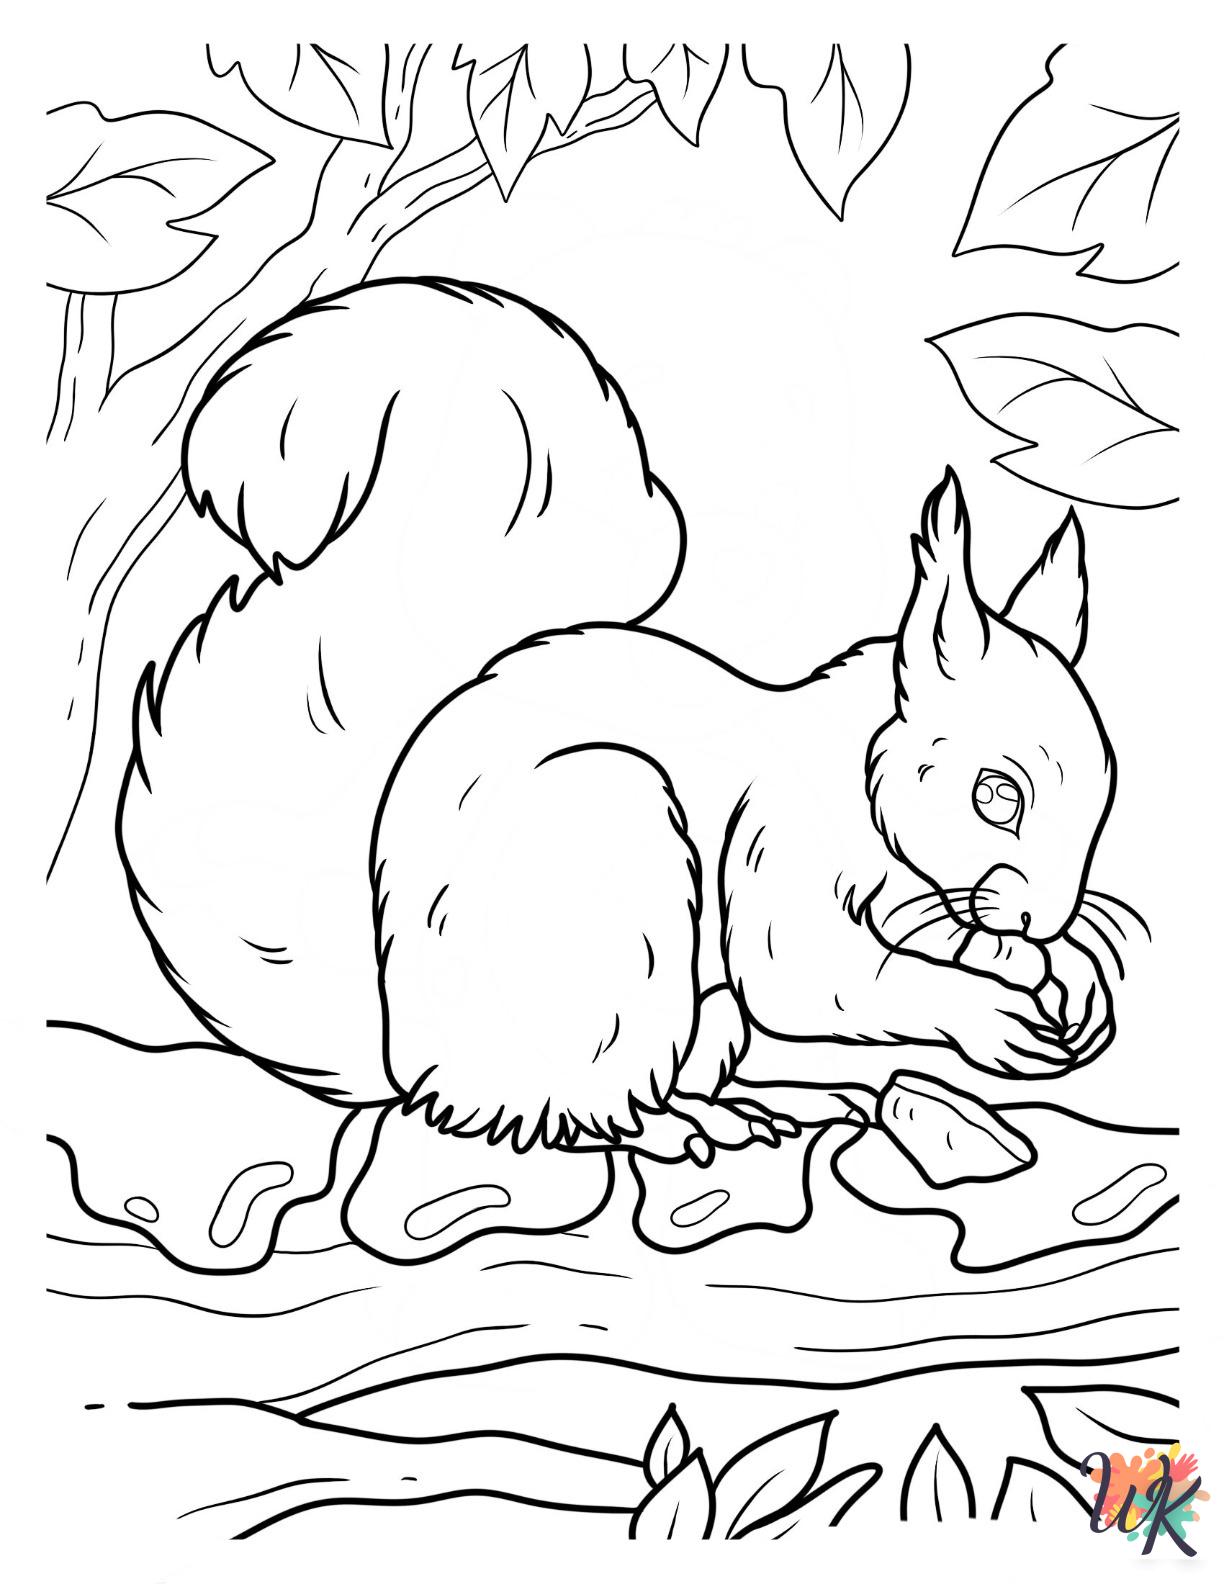 easy Squirrel coloring pages